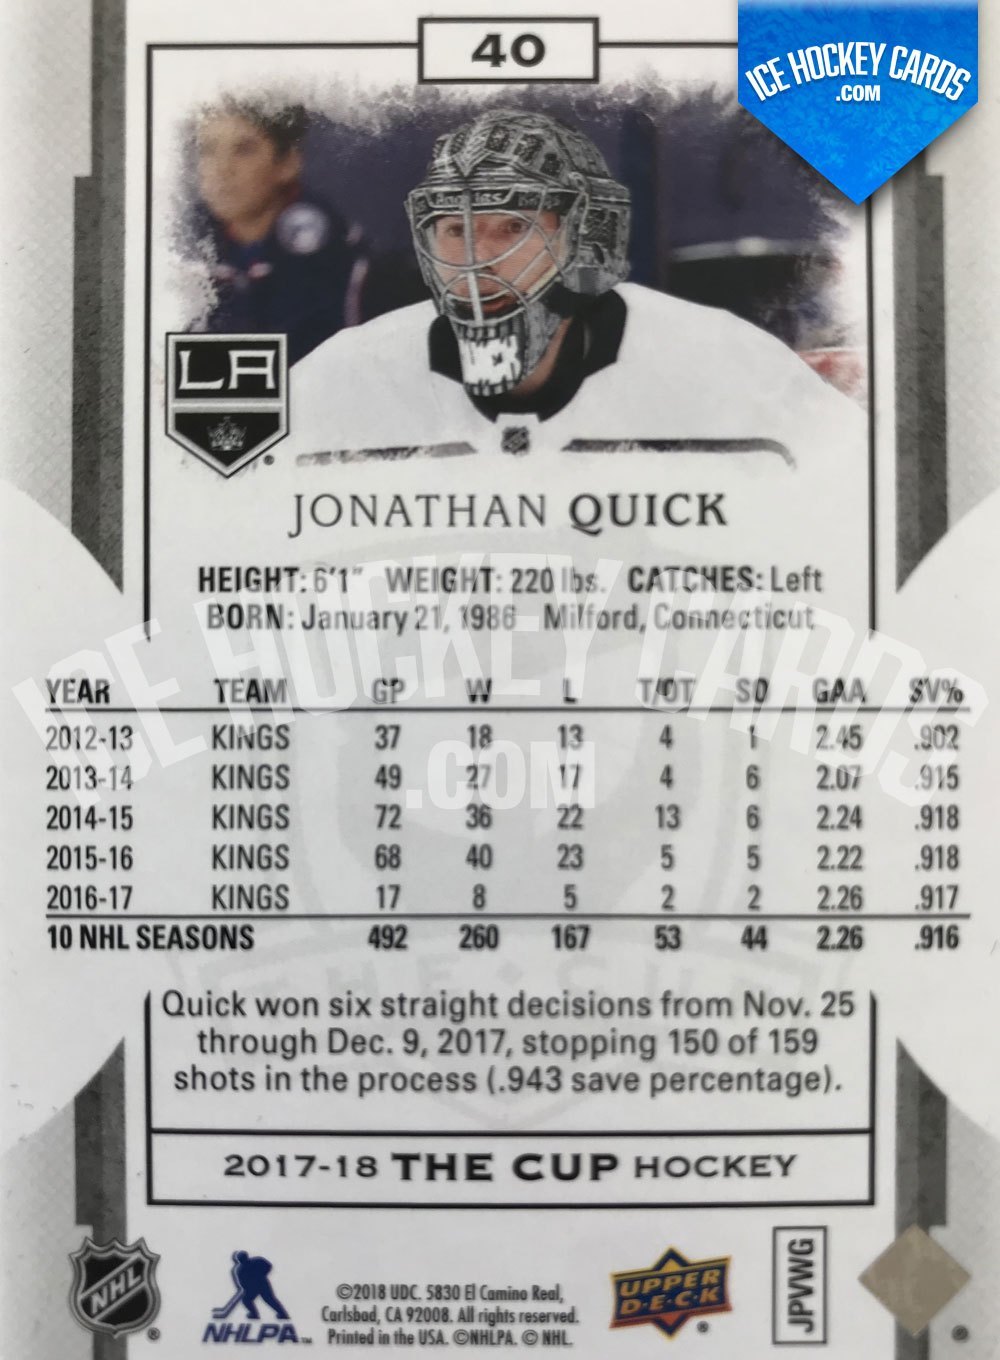 Upper Deck - The Cup 17-18 - Jonathan Quick Gold Base Card 2 of 10 RARE back